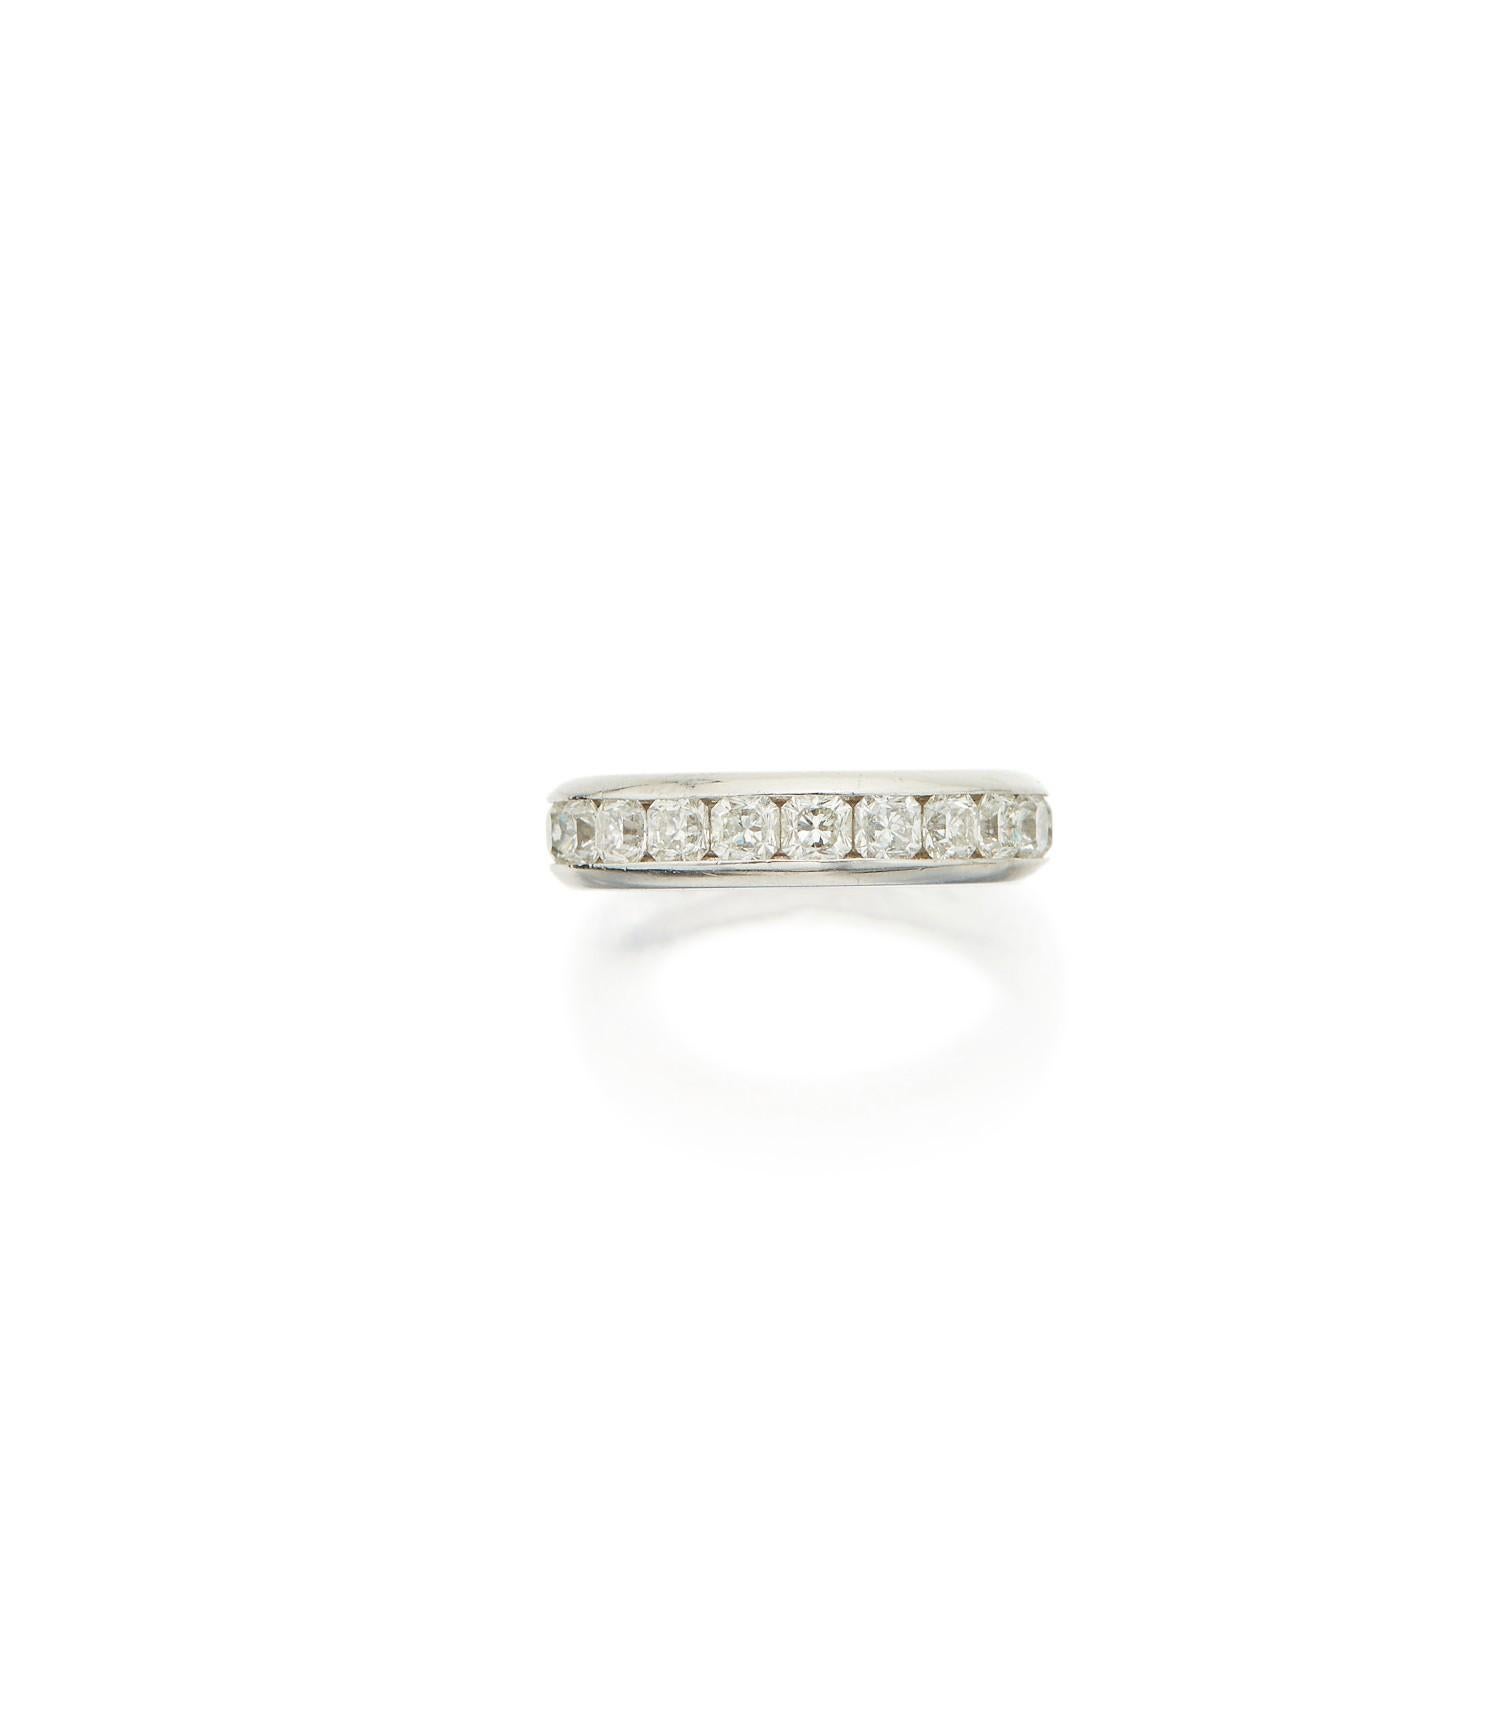 Fine platinum and diamond band ring from the 